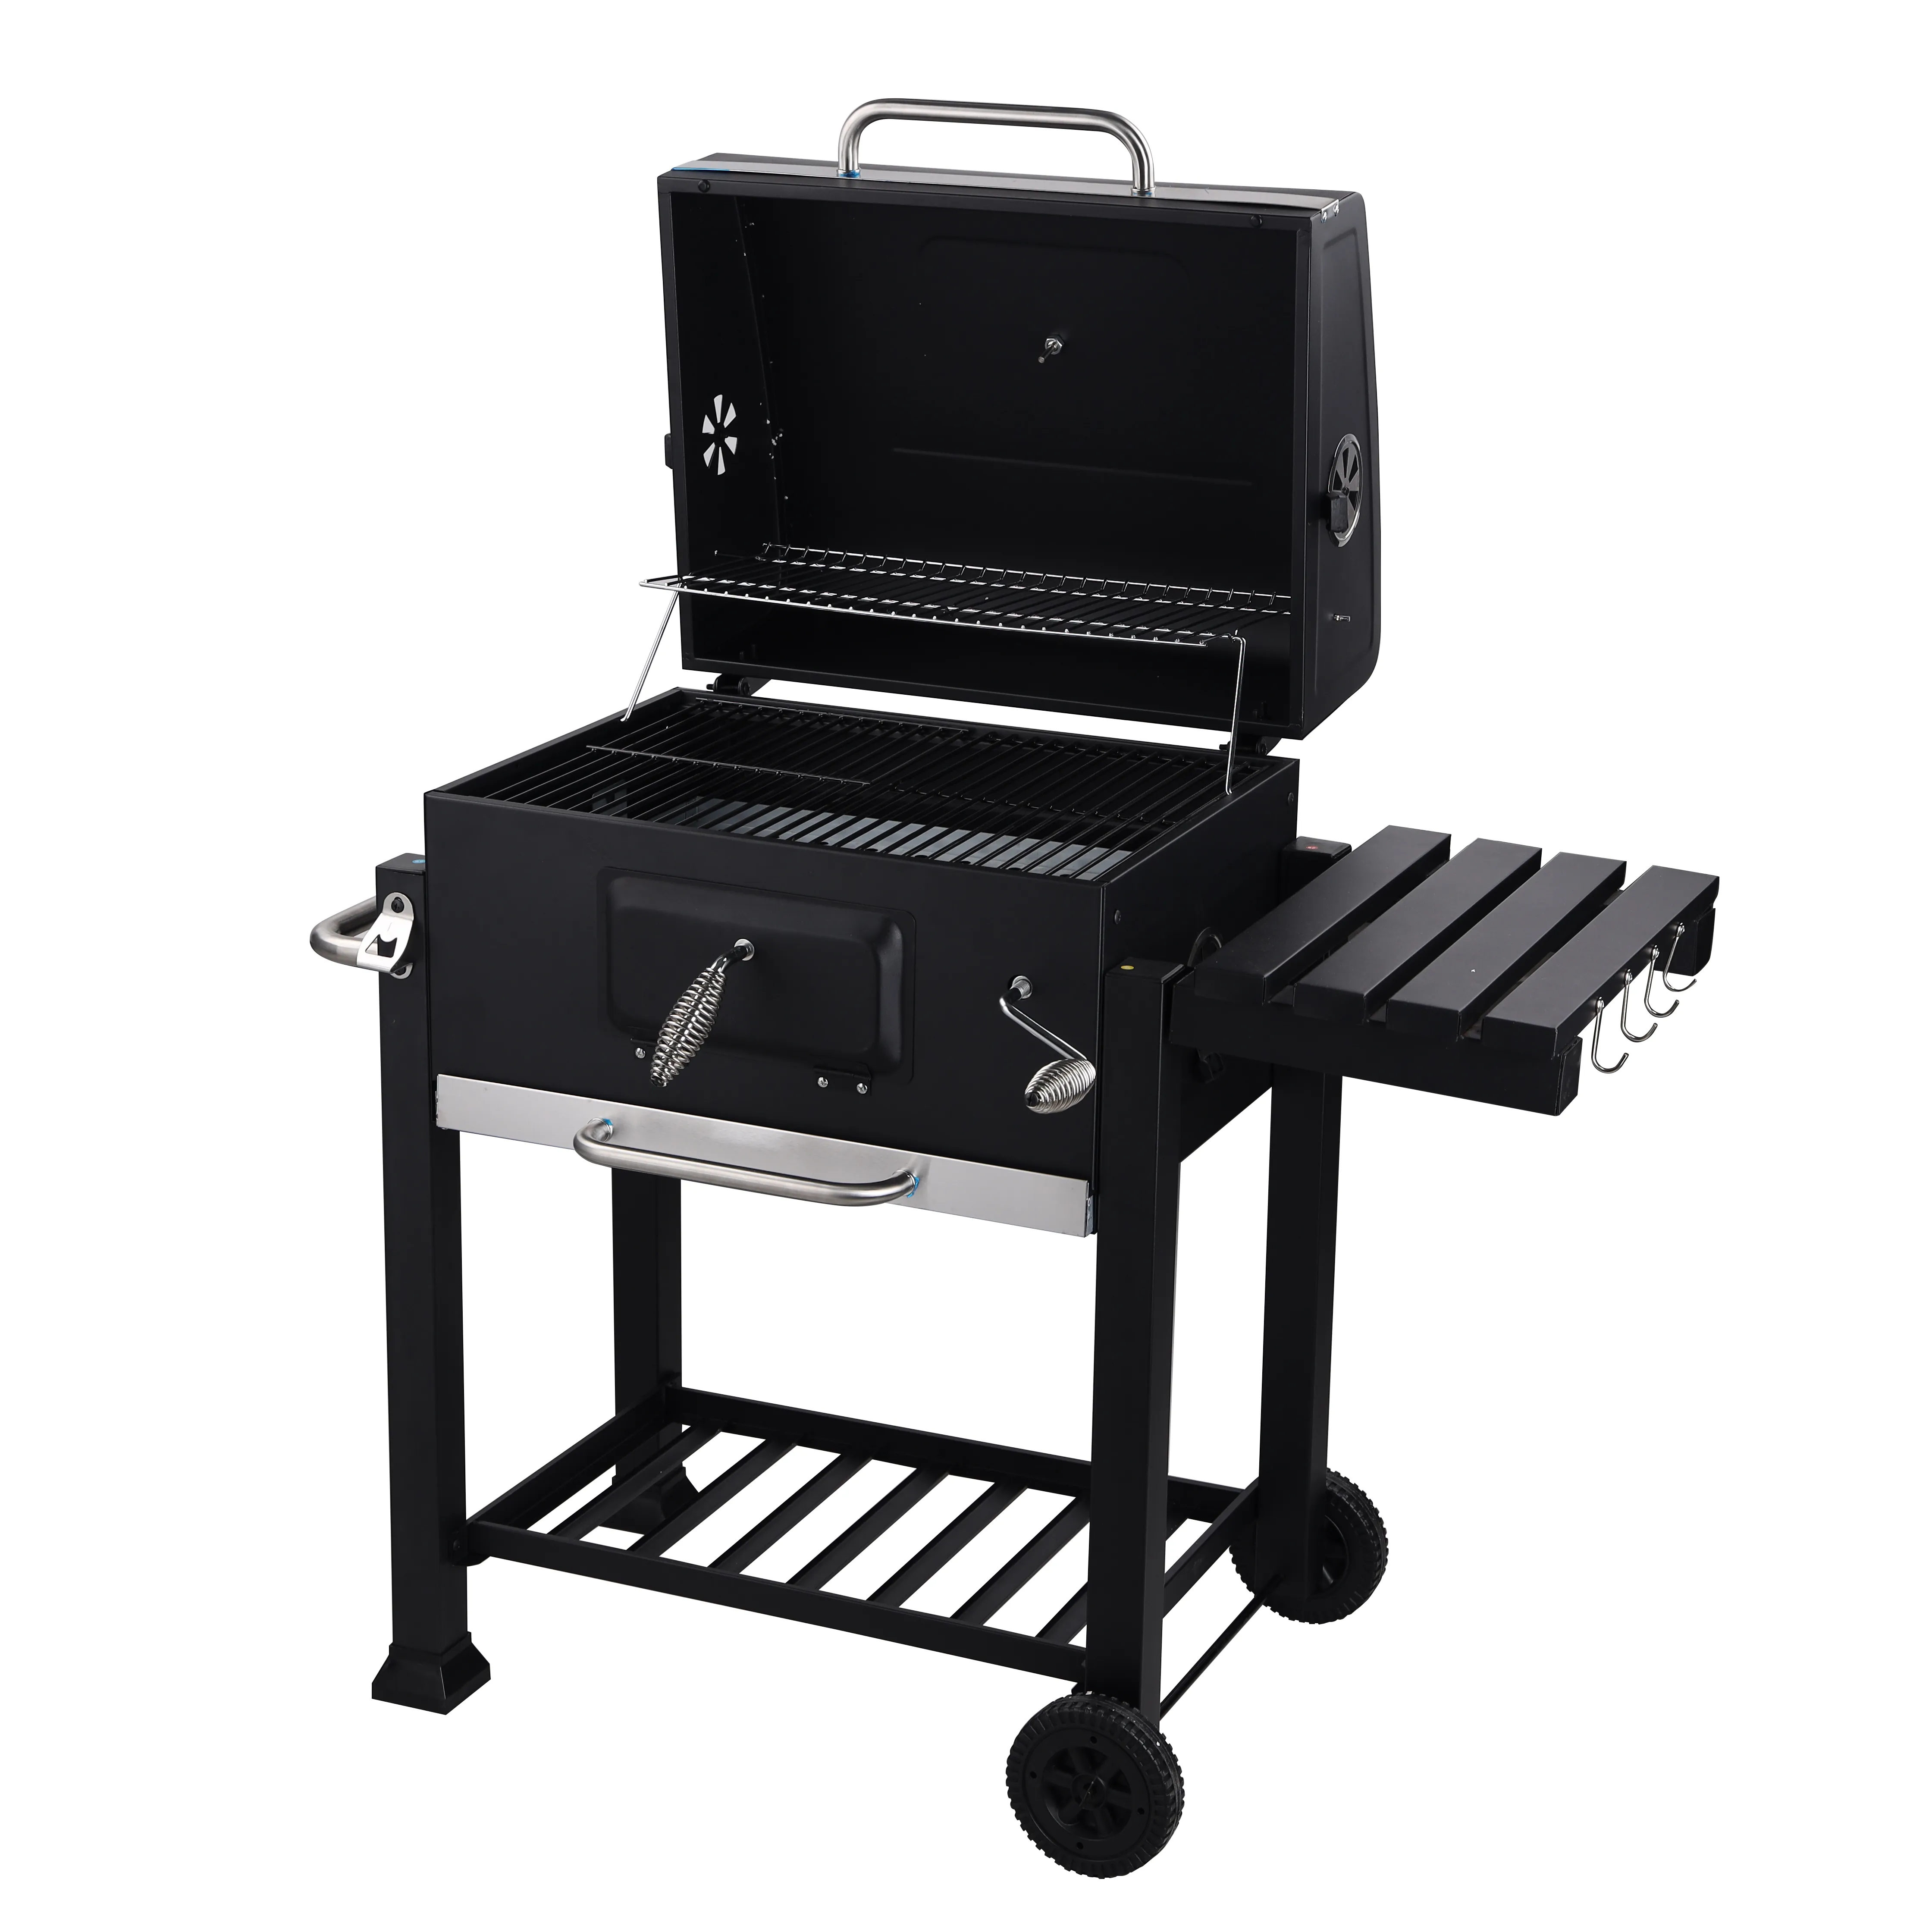 Royalford Wheeled Barbecue Stand with Grill, Iron Construction, RF10355 Two Wheels for Easy Transport Steel Handle Built-In Thermometer Two-Layer Enamelled Cooking Grills